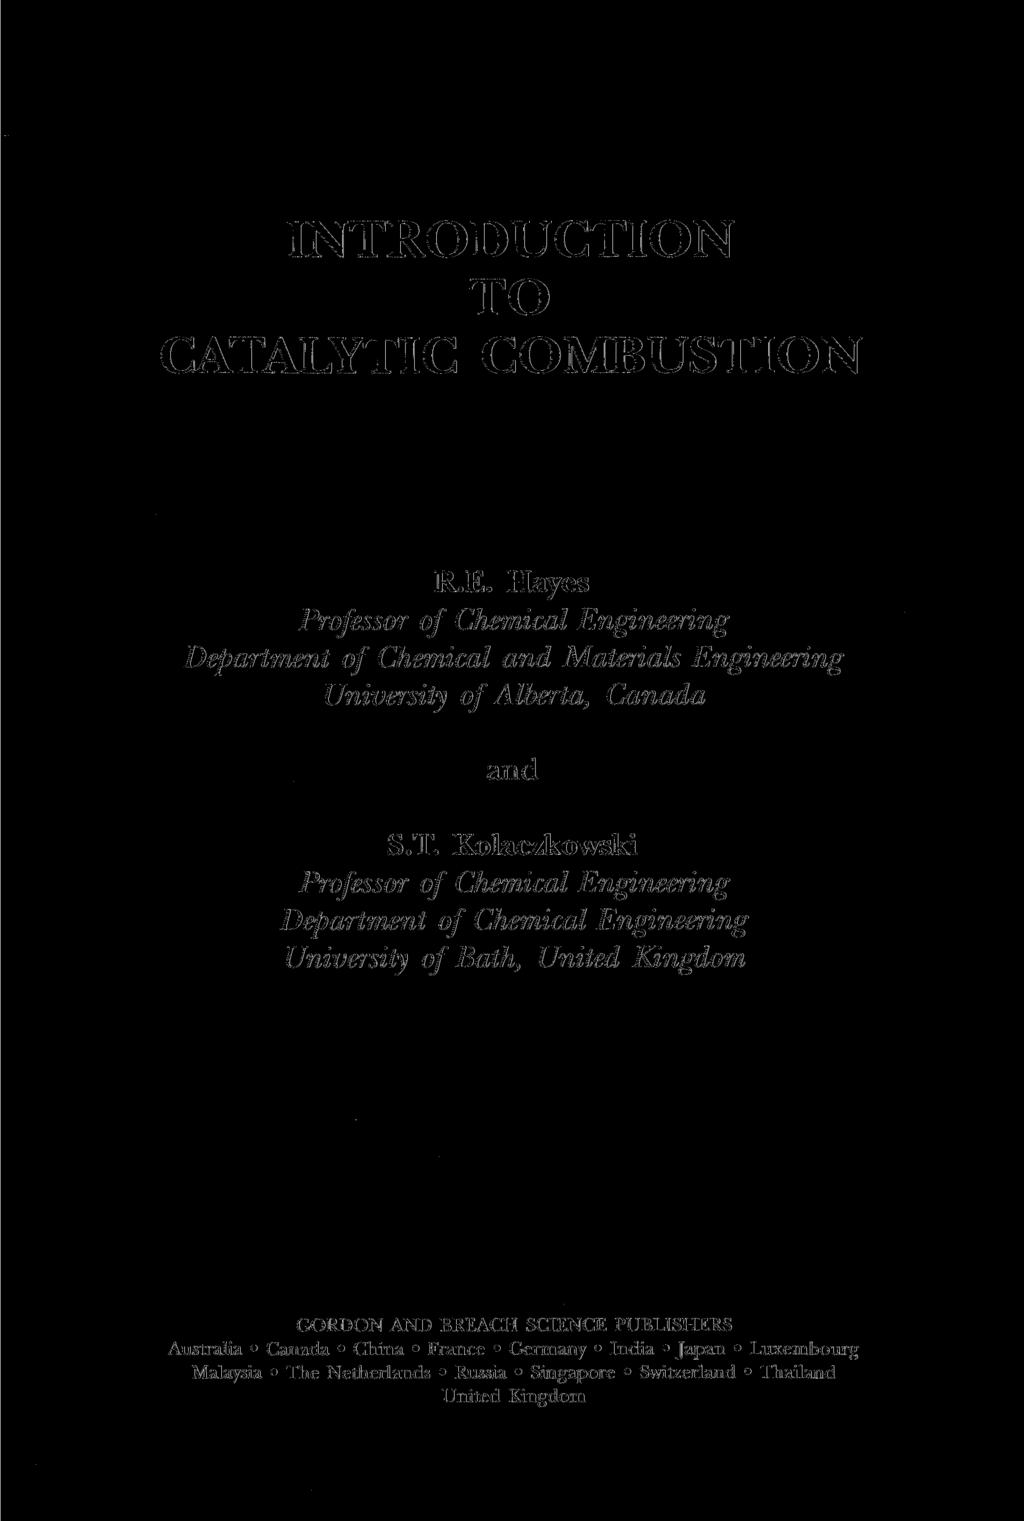 INTRODUCTION TO CATALYTIC COMBUSTION R.E. Hayes Professor of Chemical Engineering Department of Chemical and Materials Engineering University of Alberta, Canada and S.T. Kolaczkowski Professor of